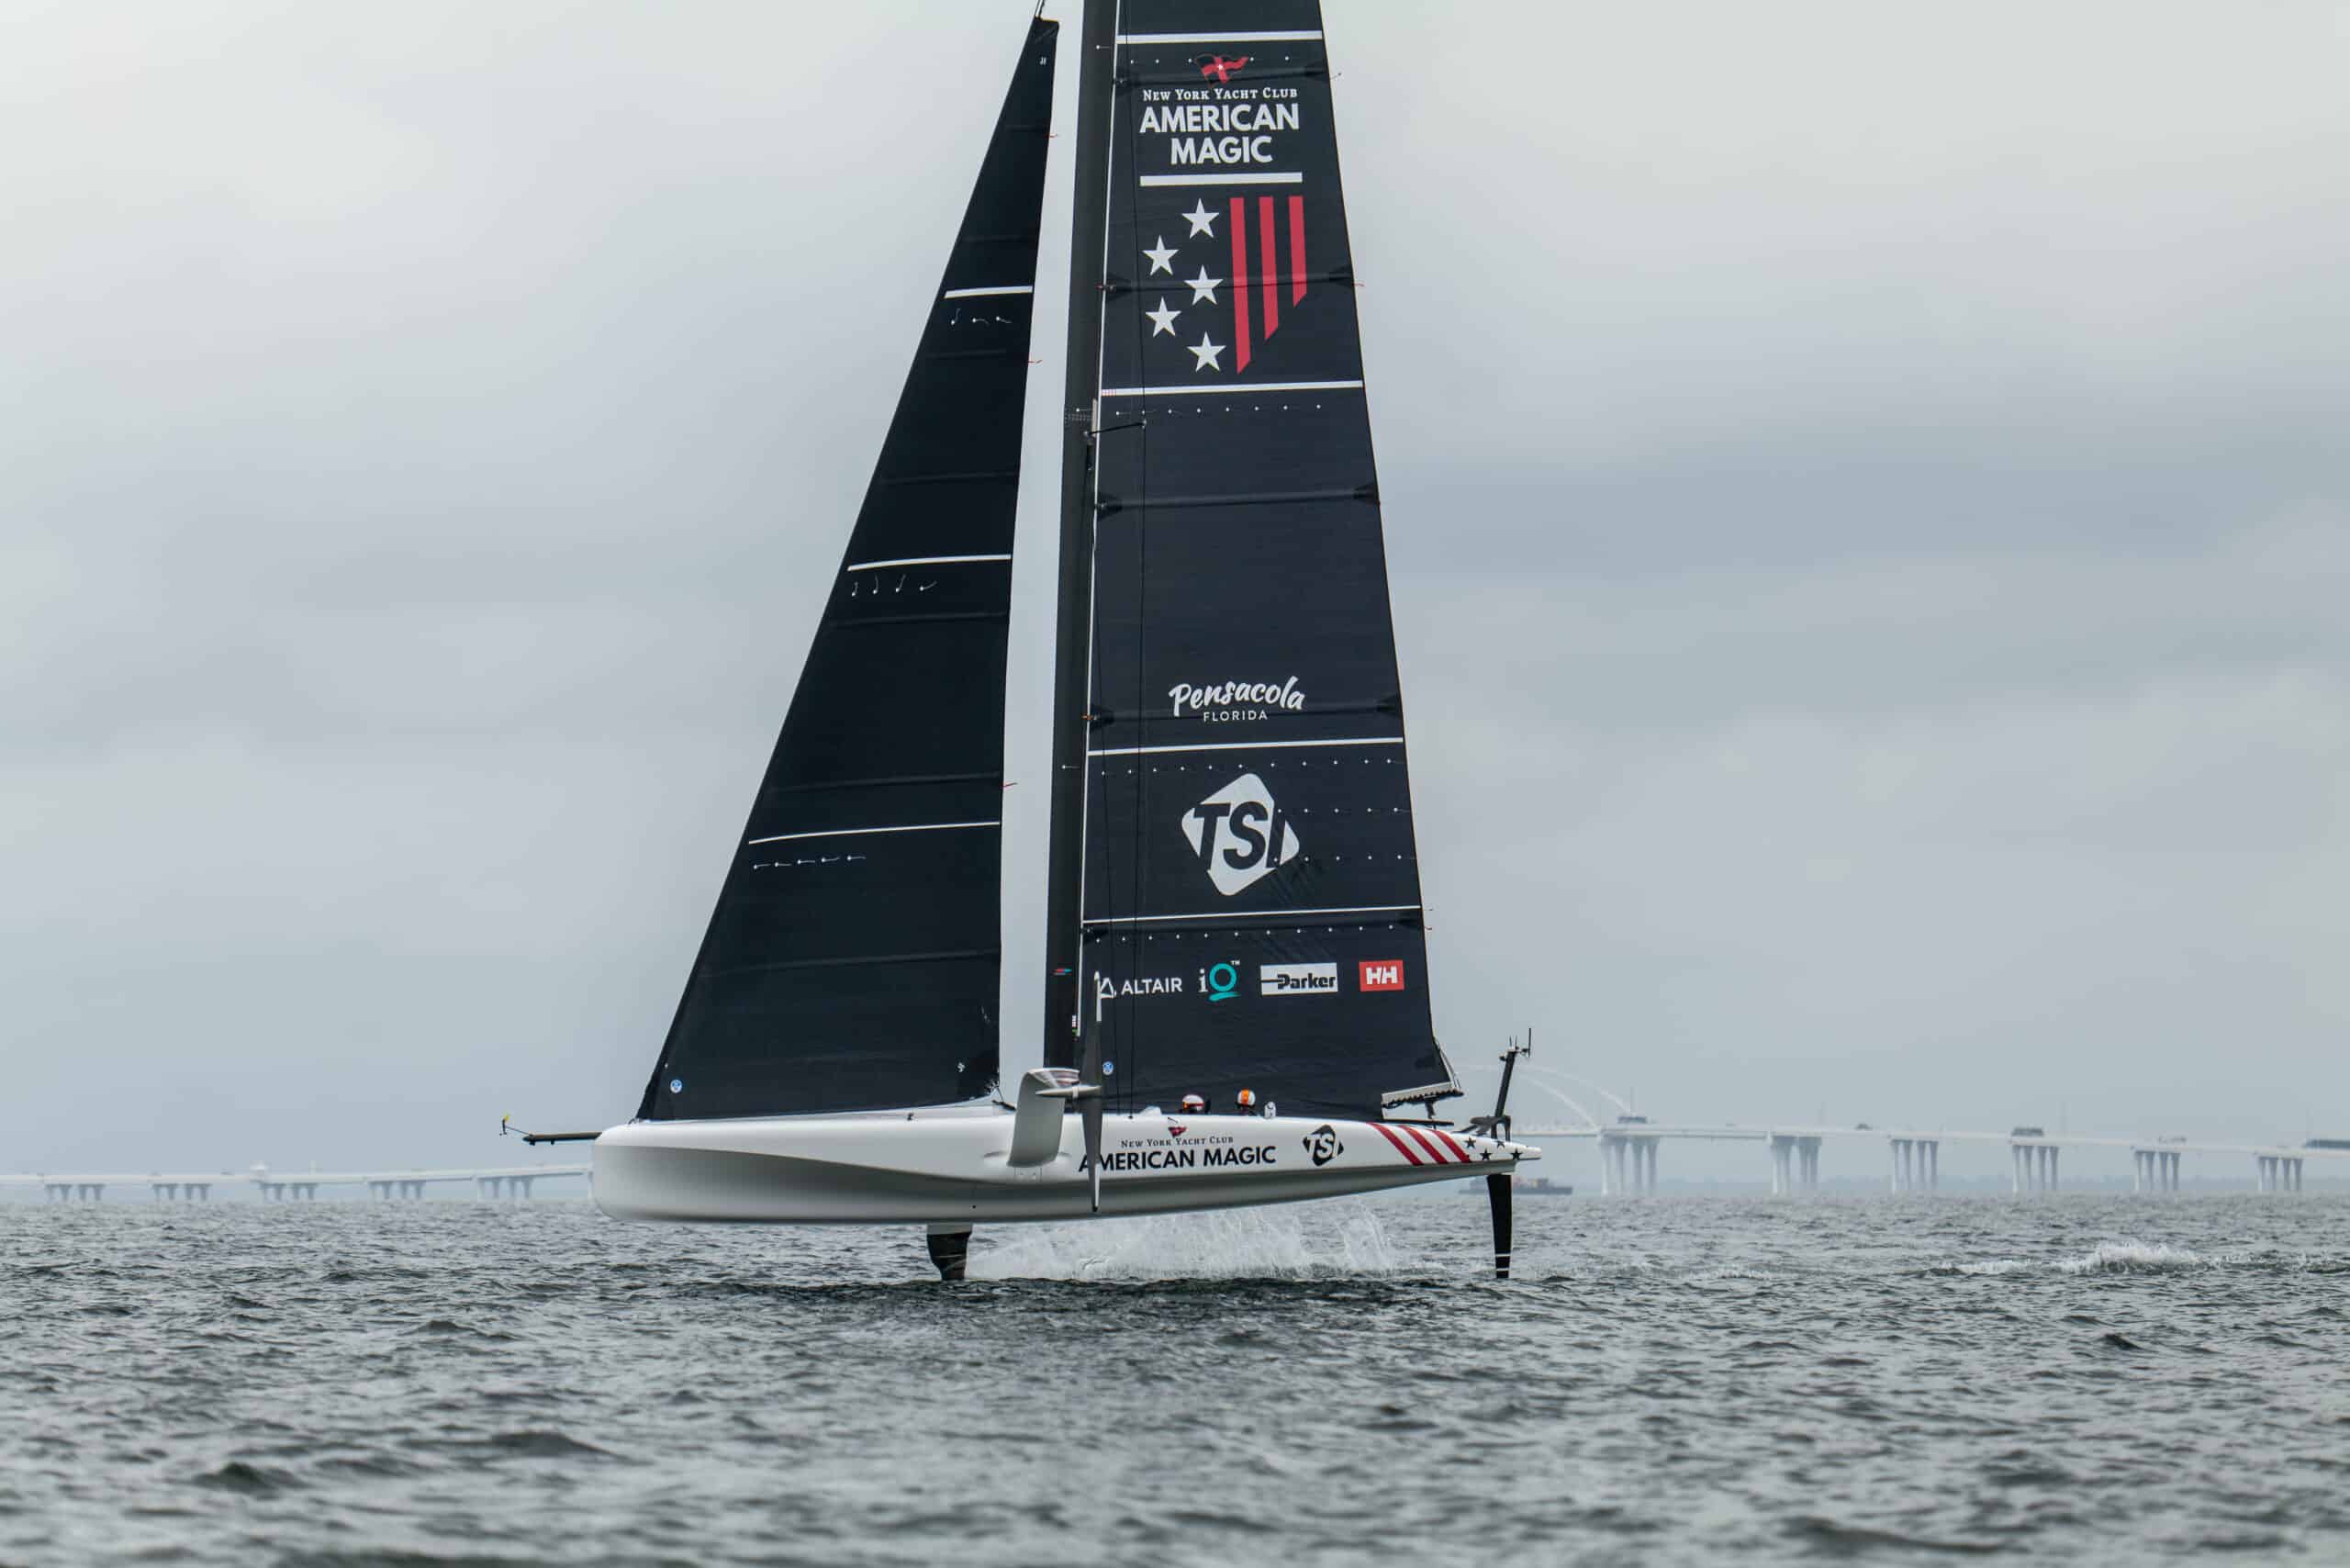 America's Cup: Another genius Team New Zealand design move